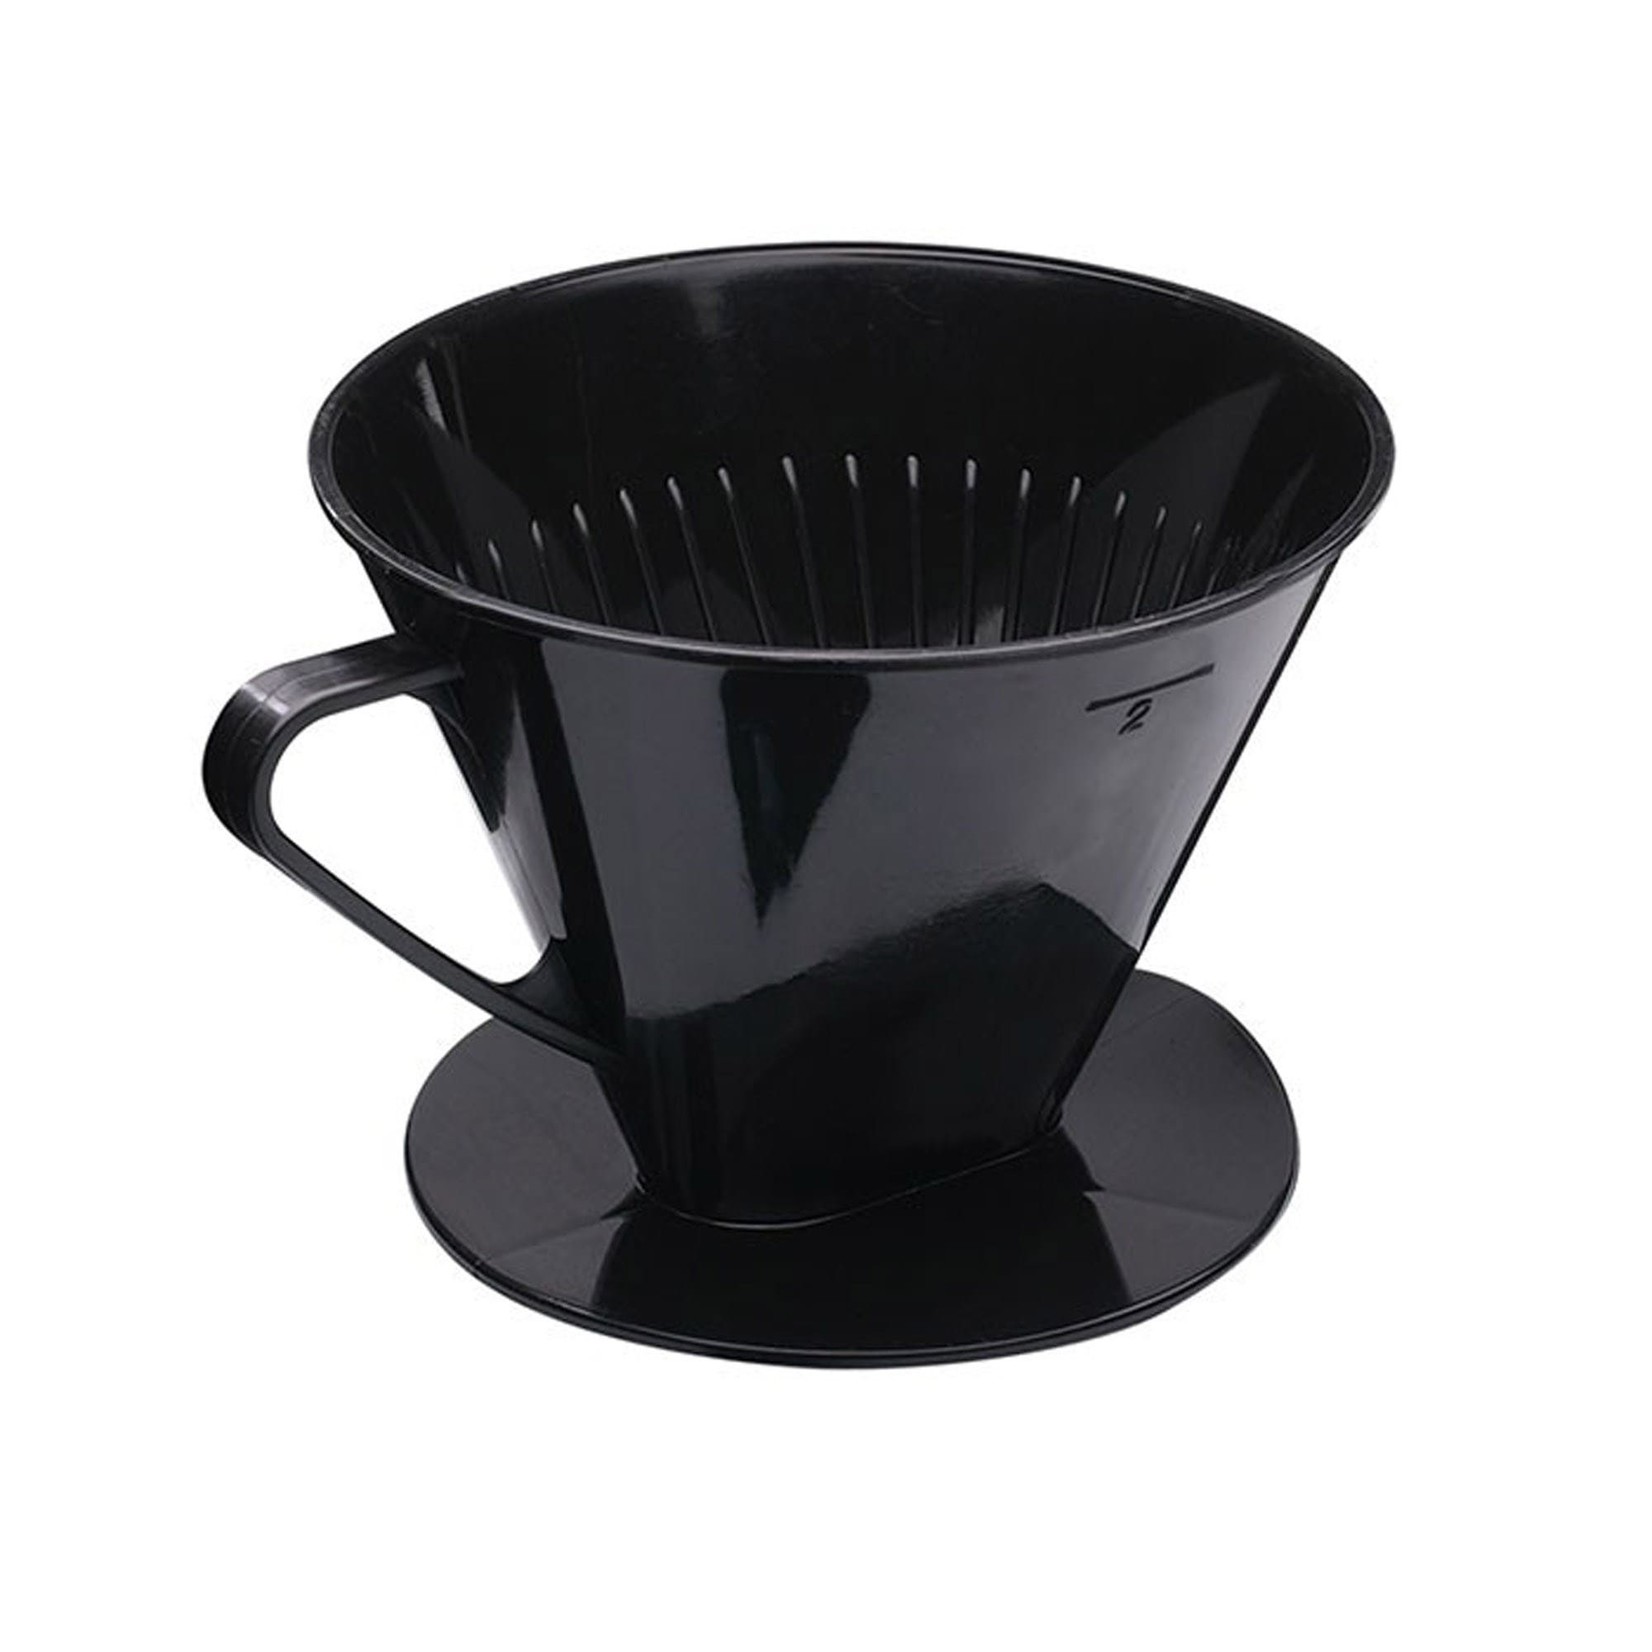 WESTMARK WESTMARK Pour Over Coffee Filter #2